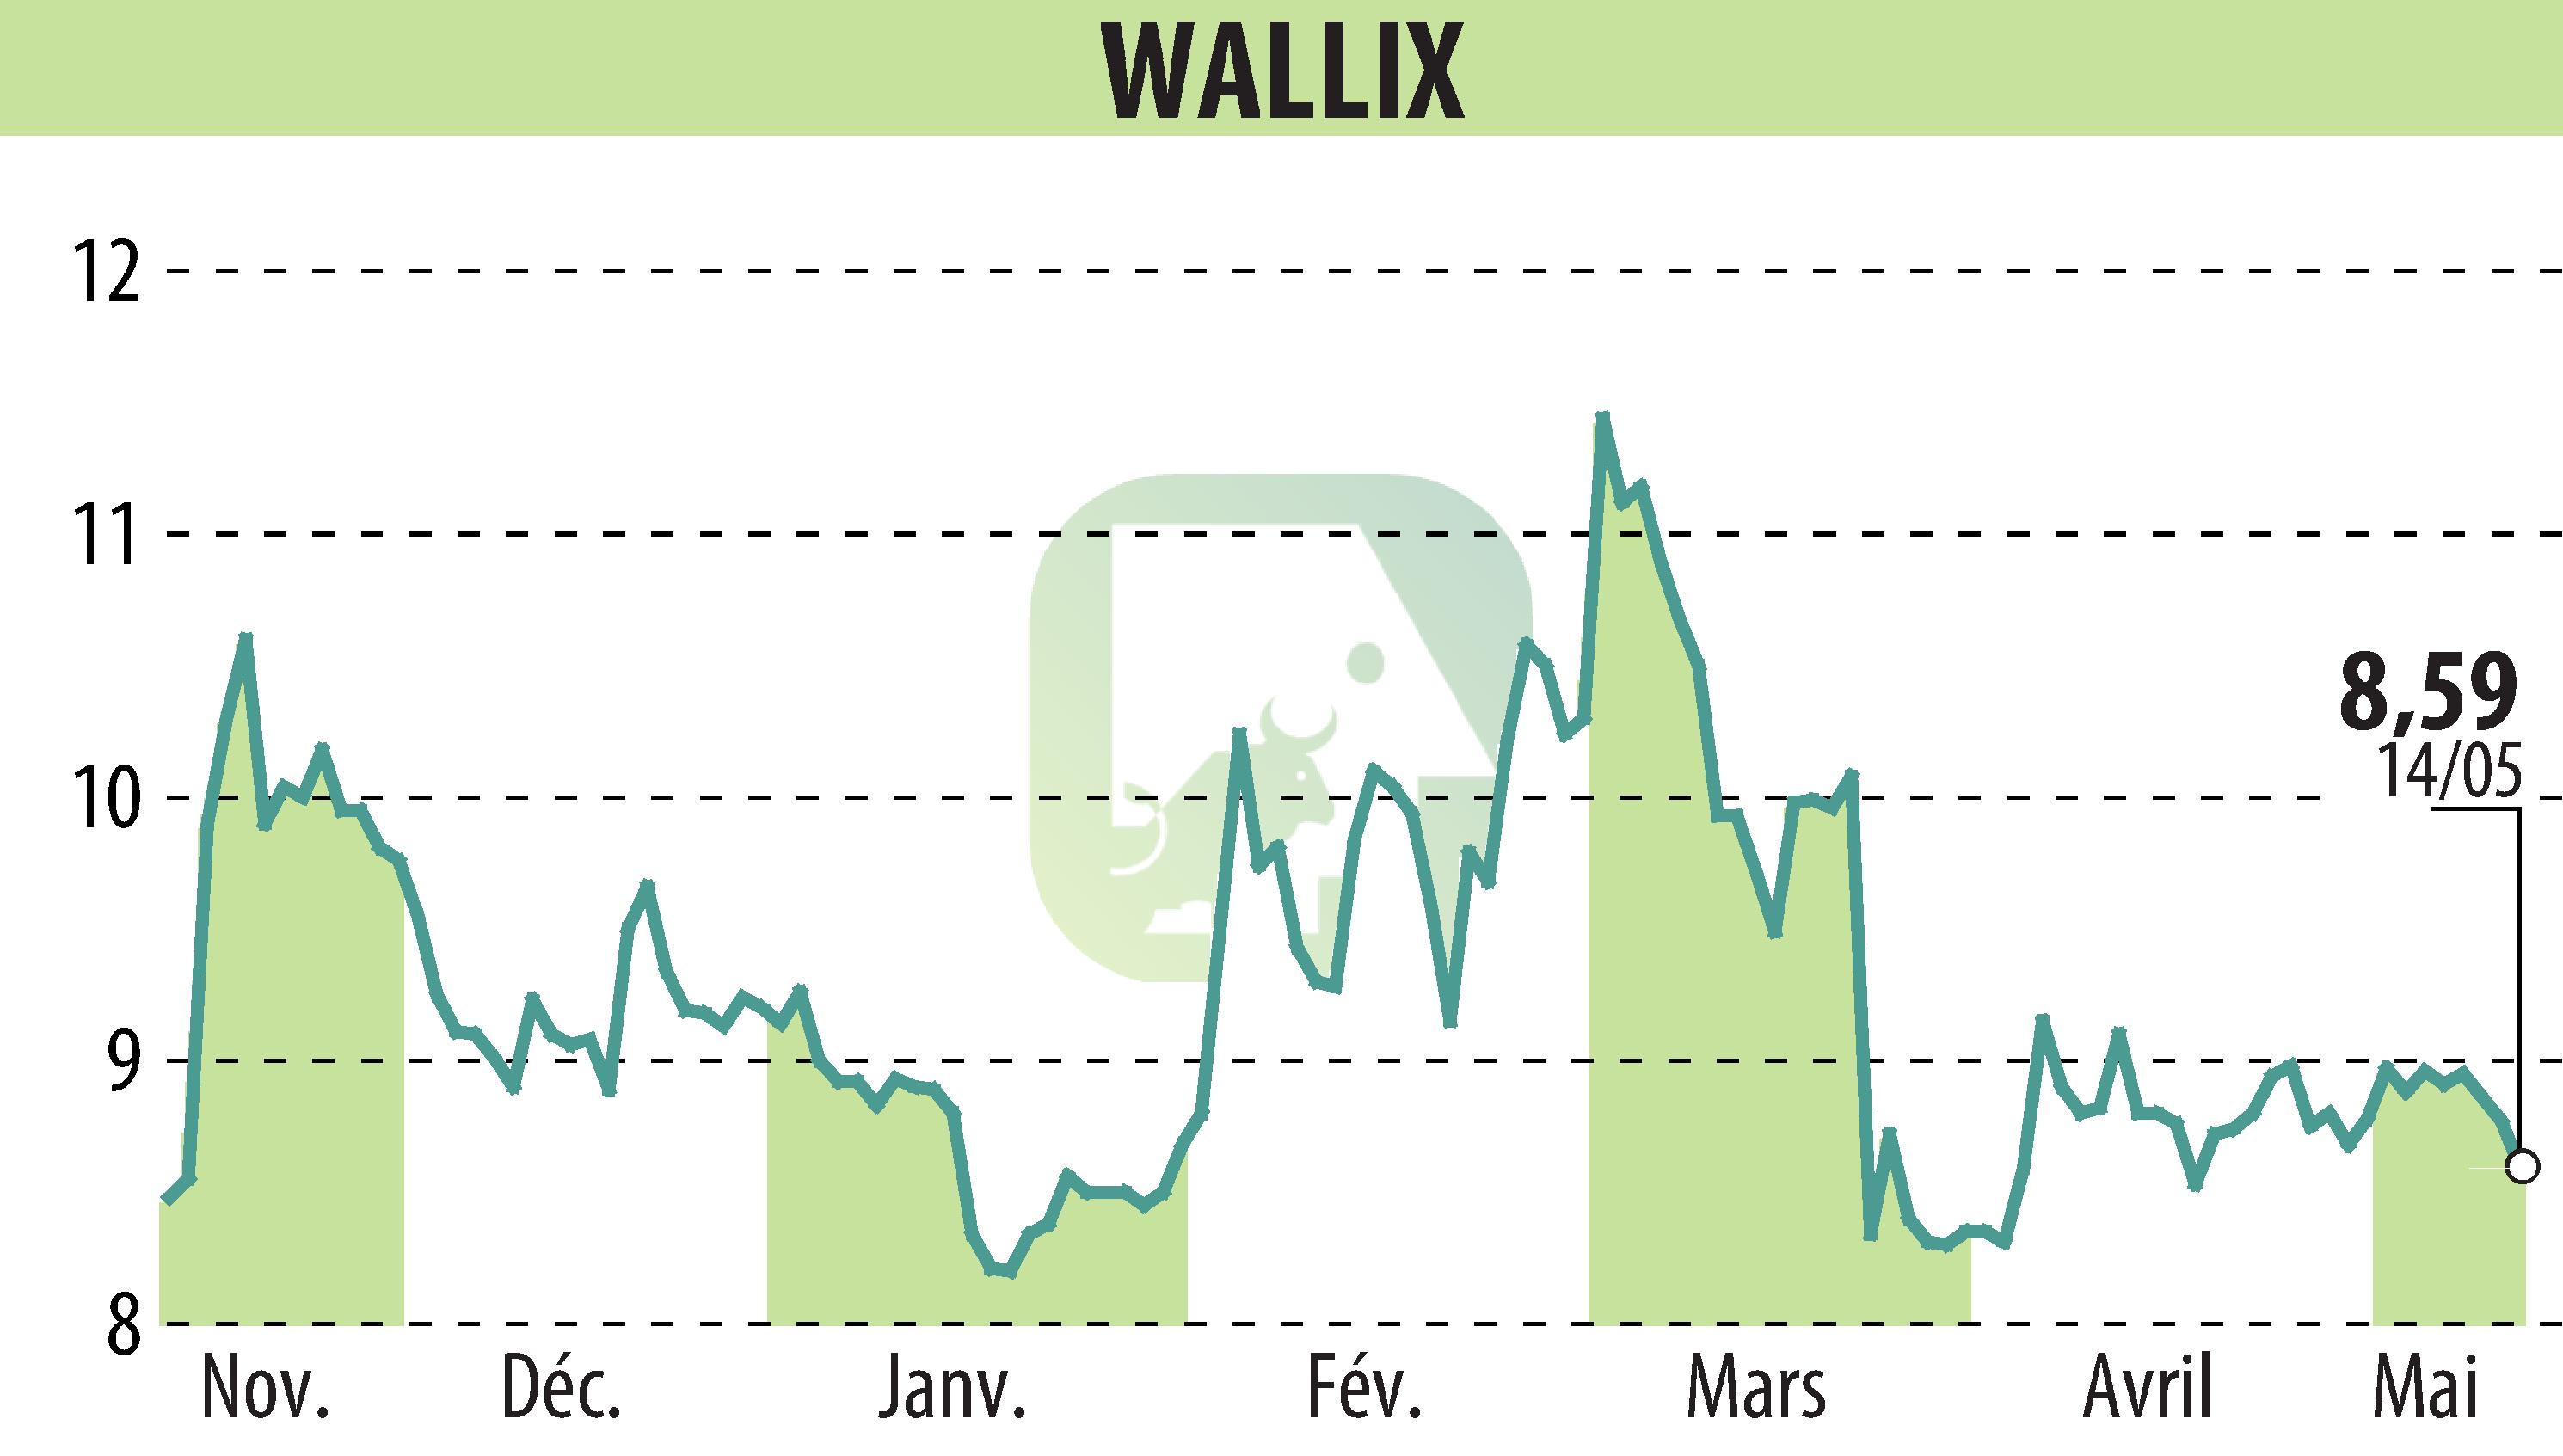 Stock price chart of WALLIX (EPA:ALLIX) showing fluctuations.